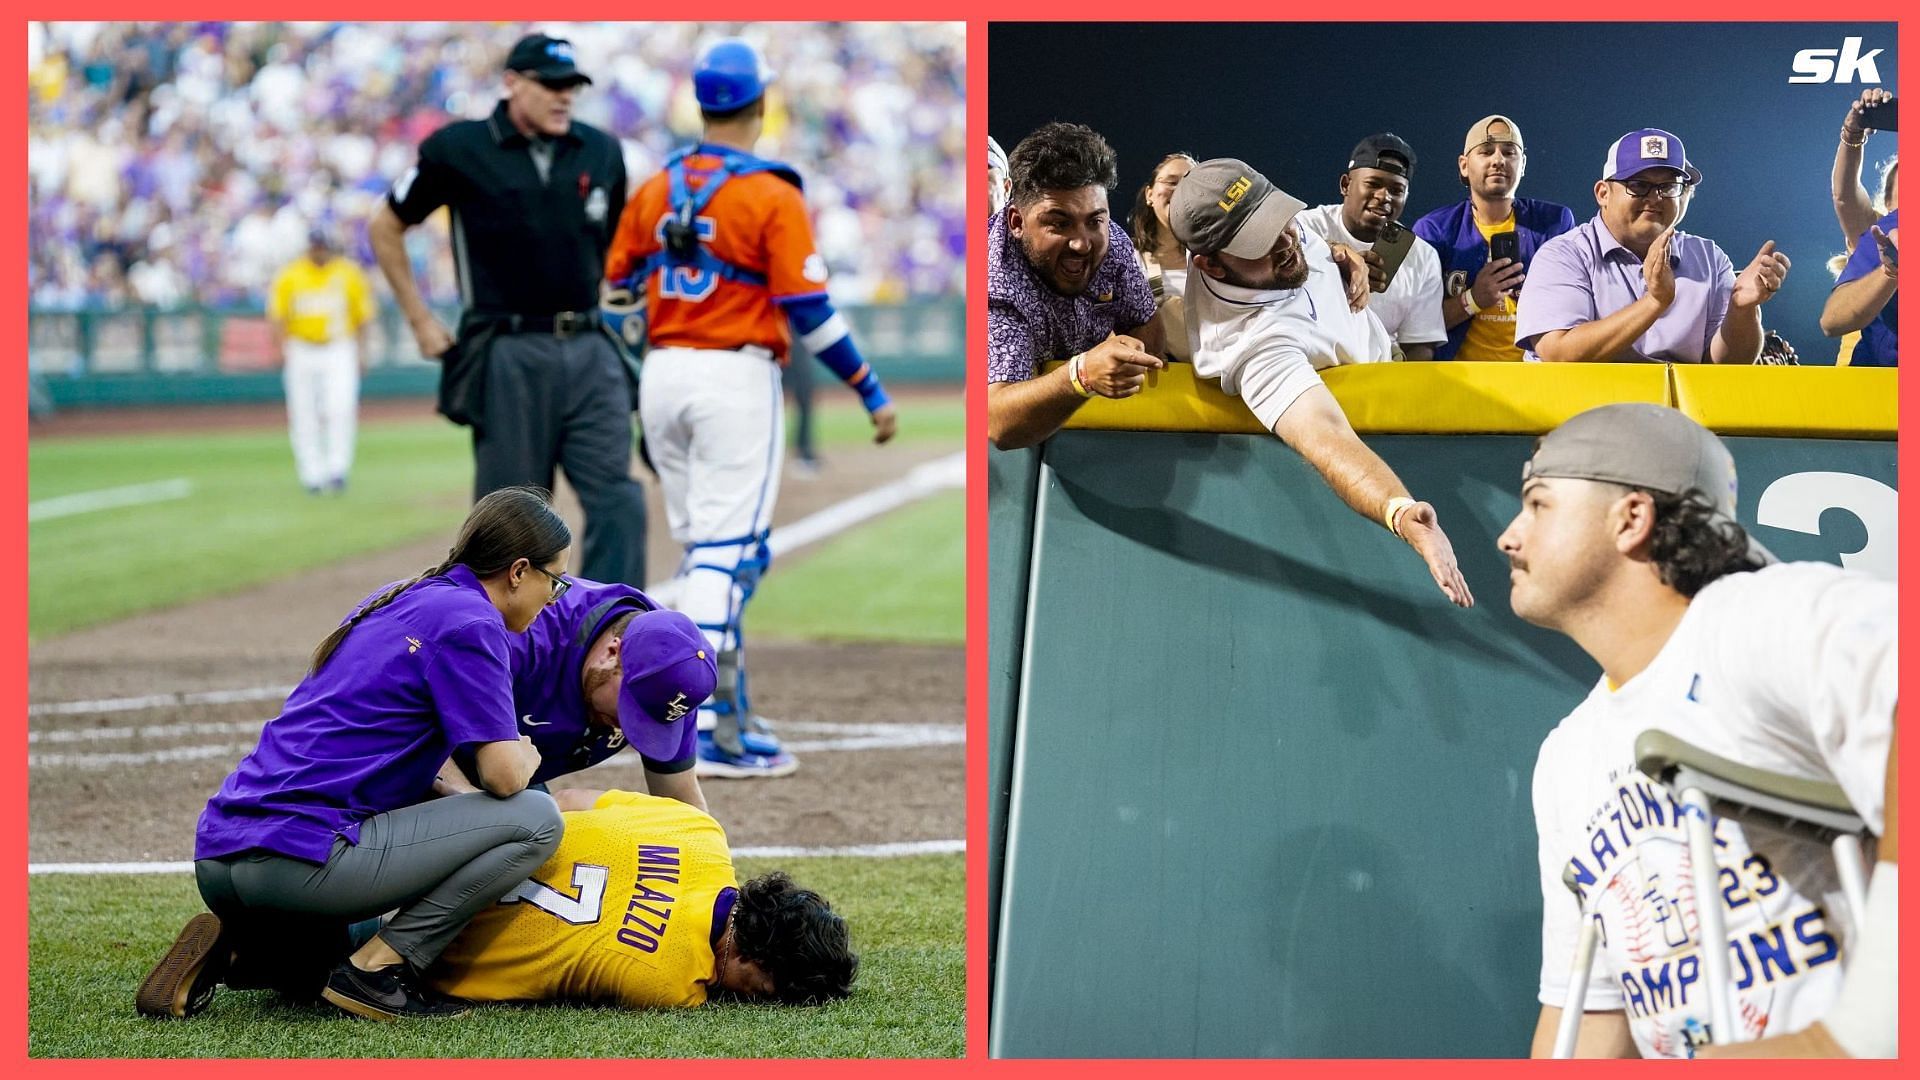 Alex Milazzo of LSU got hurt while attempting to complete a run in game 3 of the Men